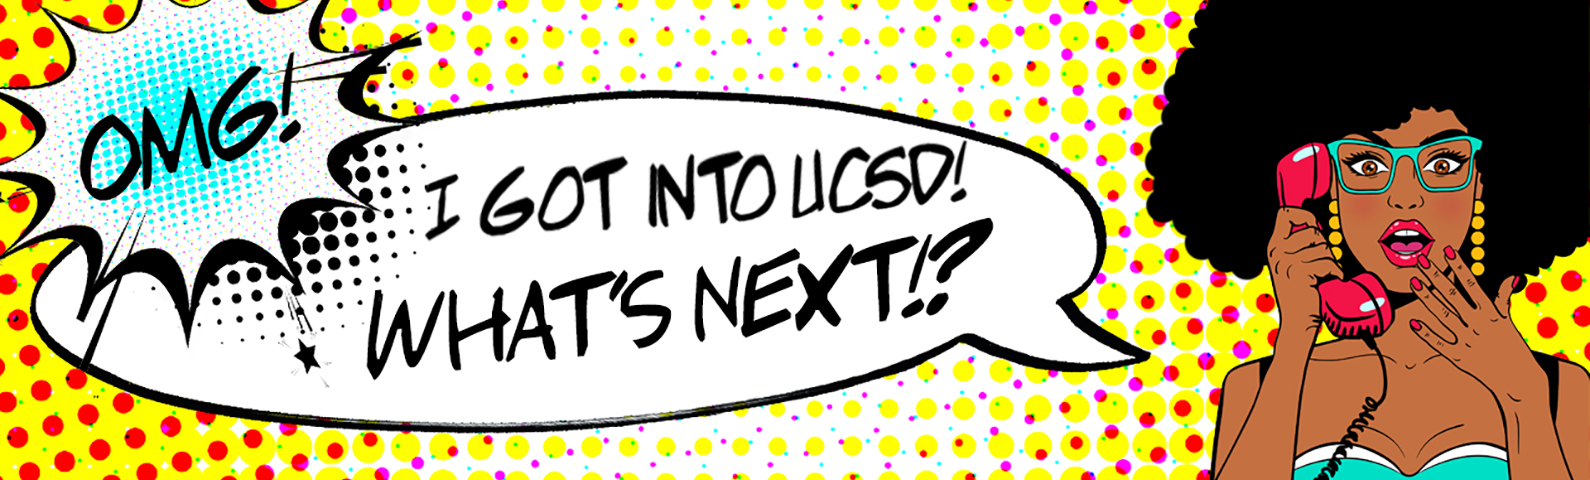 banner in pop art comic style featuring a person with dark skin and black textured hair exclaiming "I got into UCSD, What's next?!"